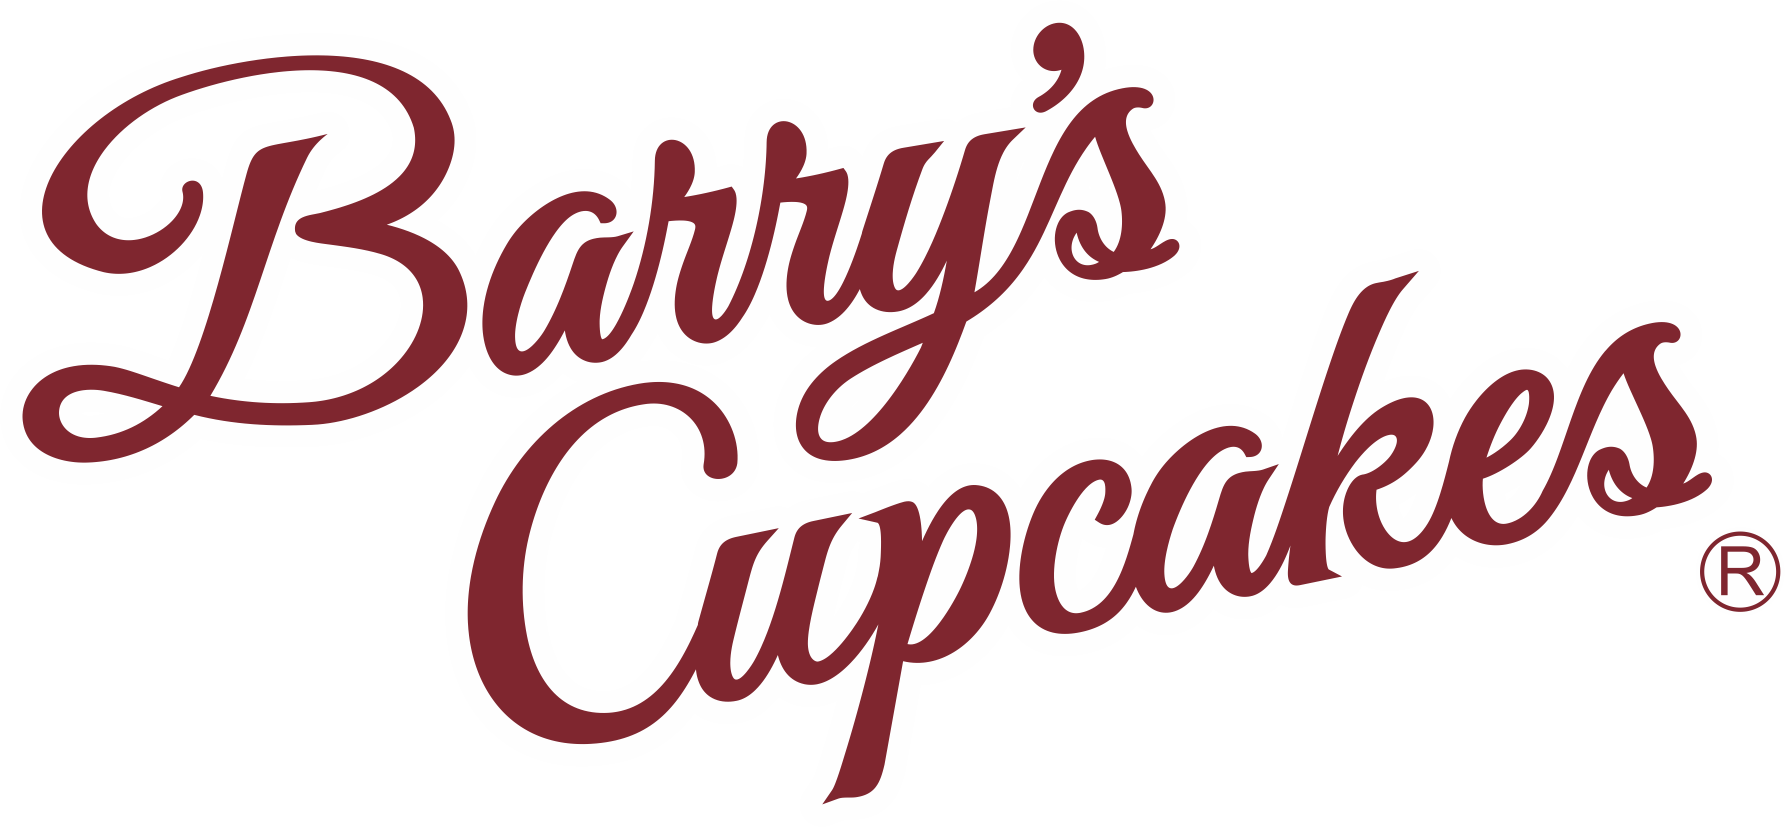 Barry's Cupcakes - Coffe To Go Czech